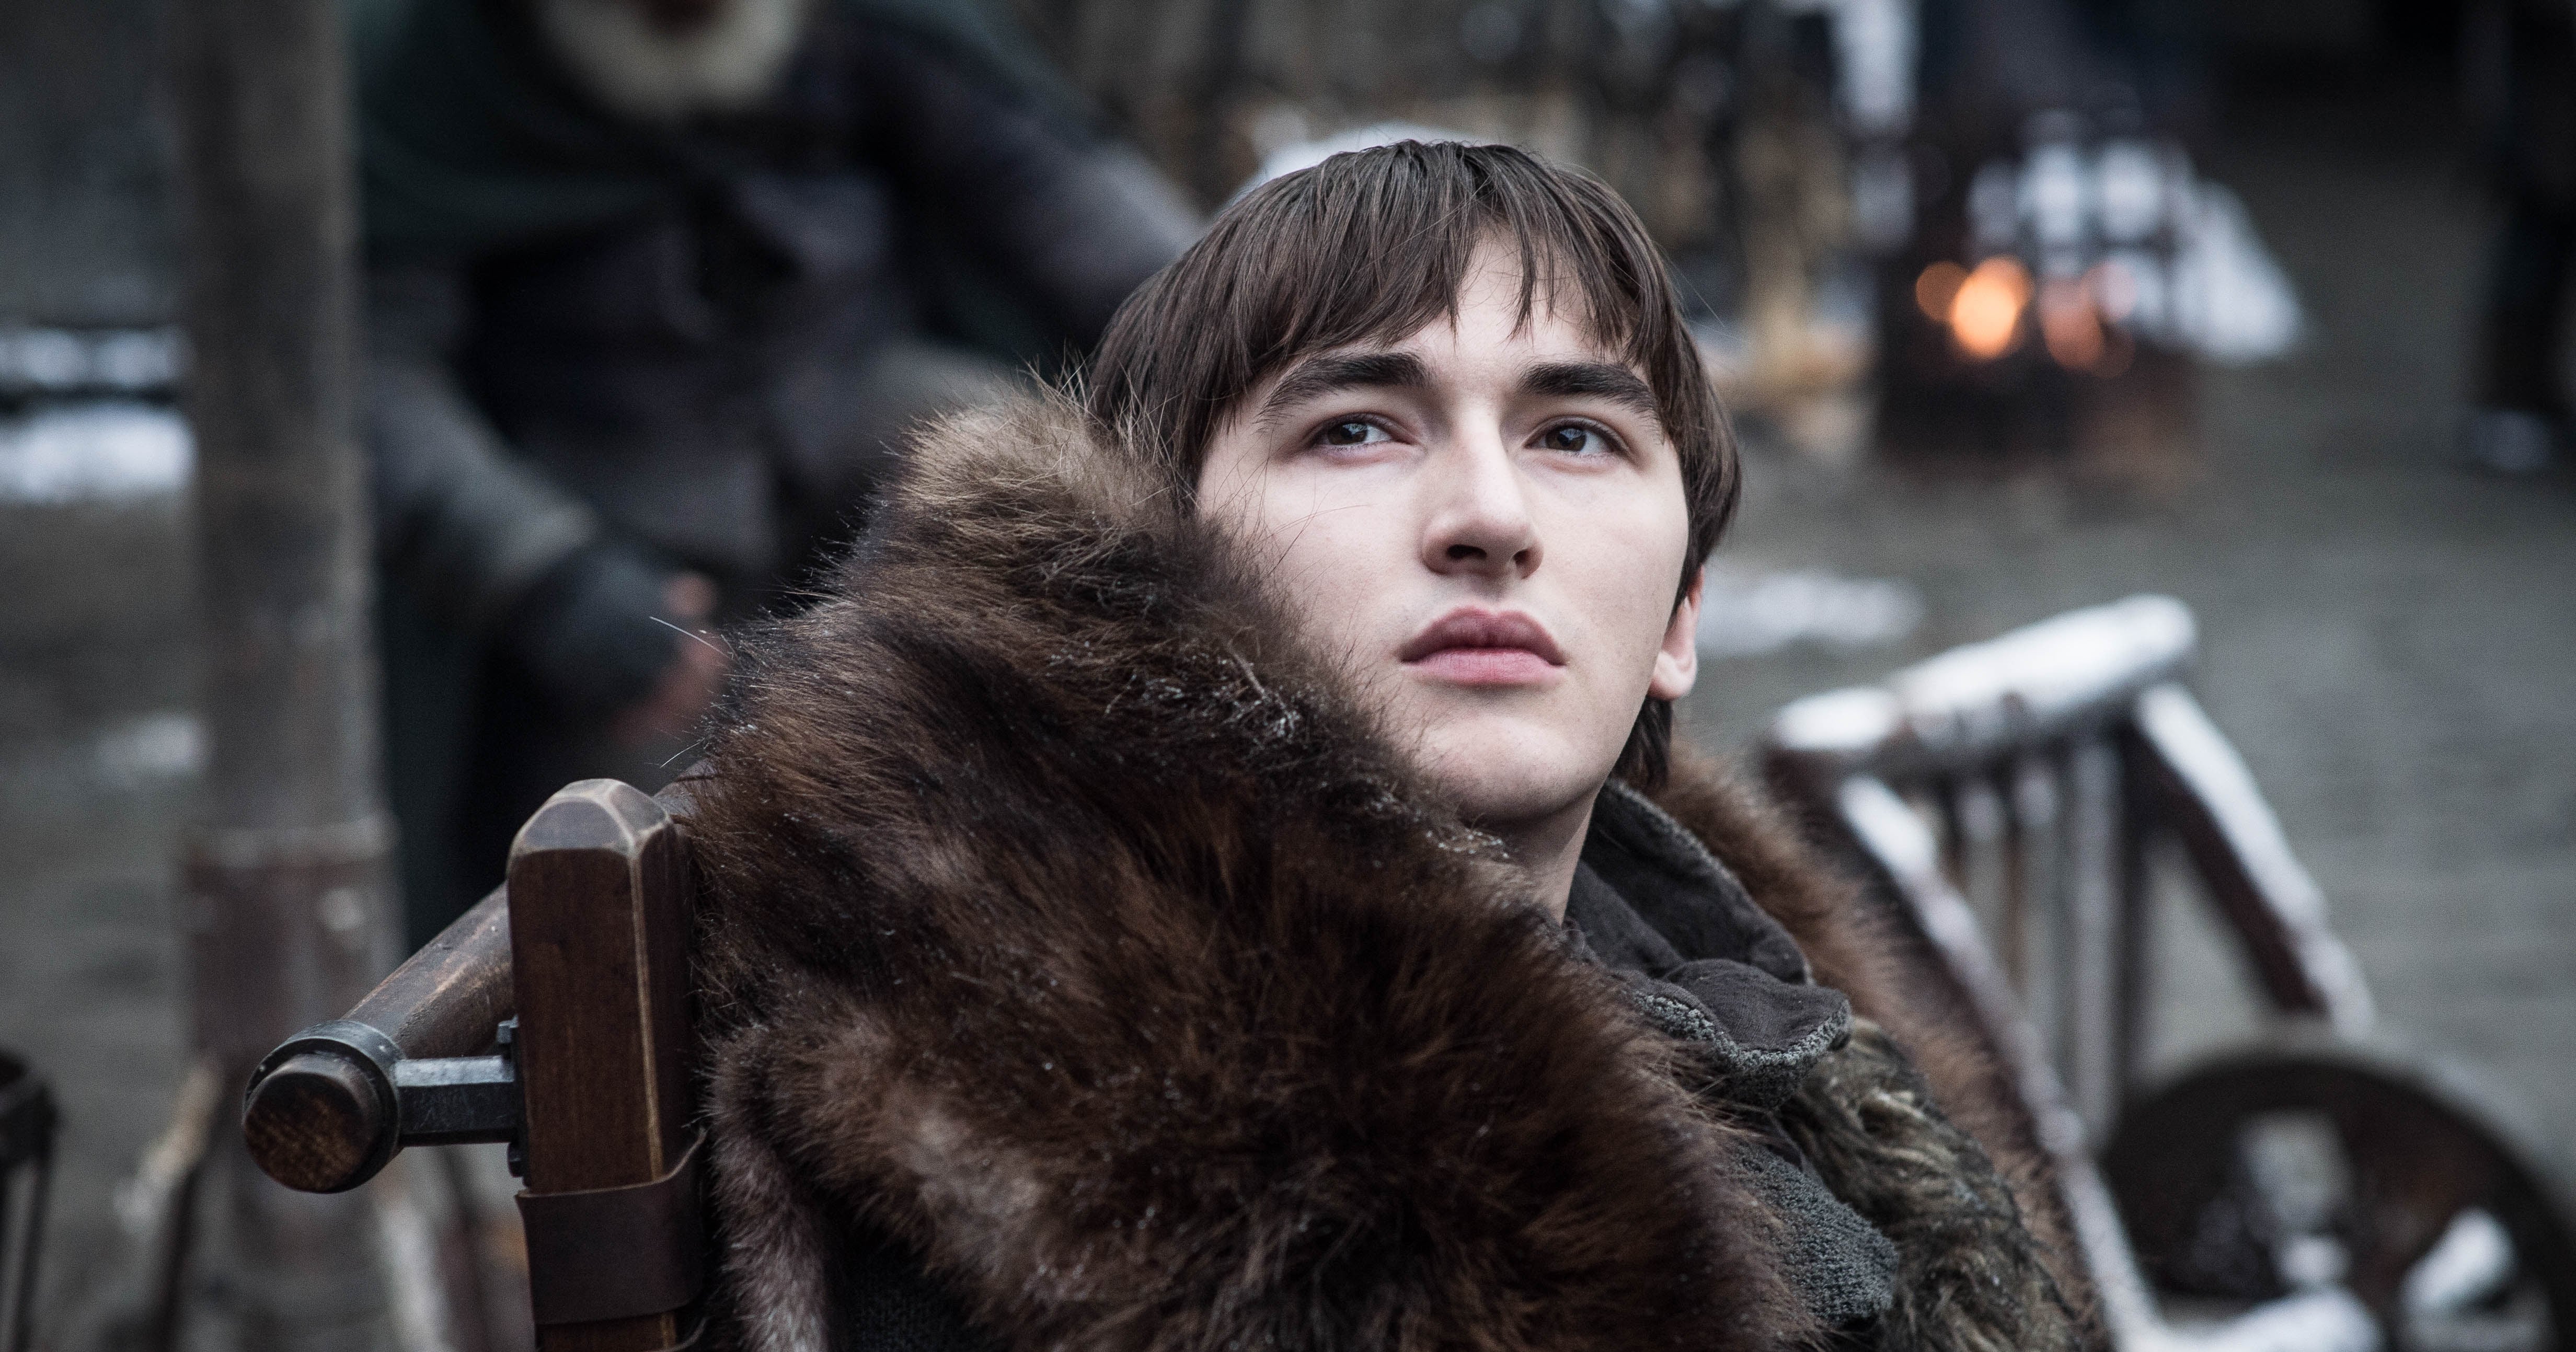 How powerful is Bran Stark? Can he actually change or at least